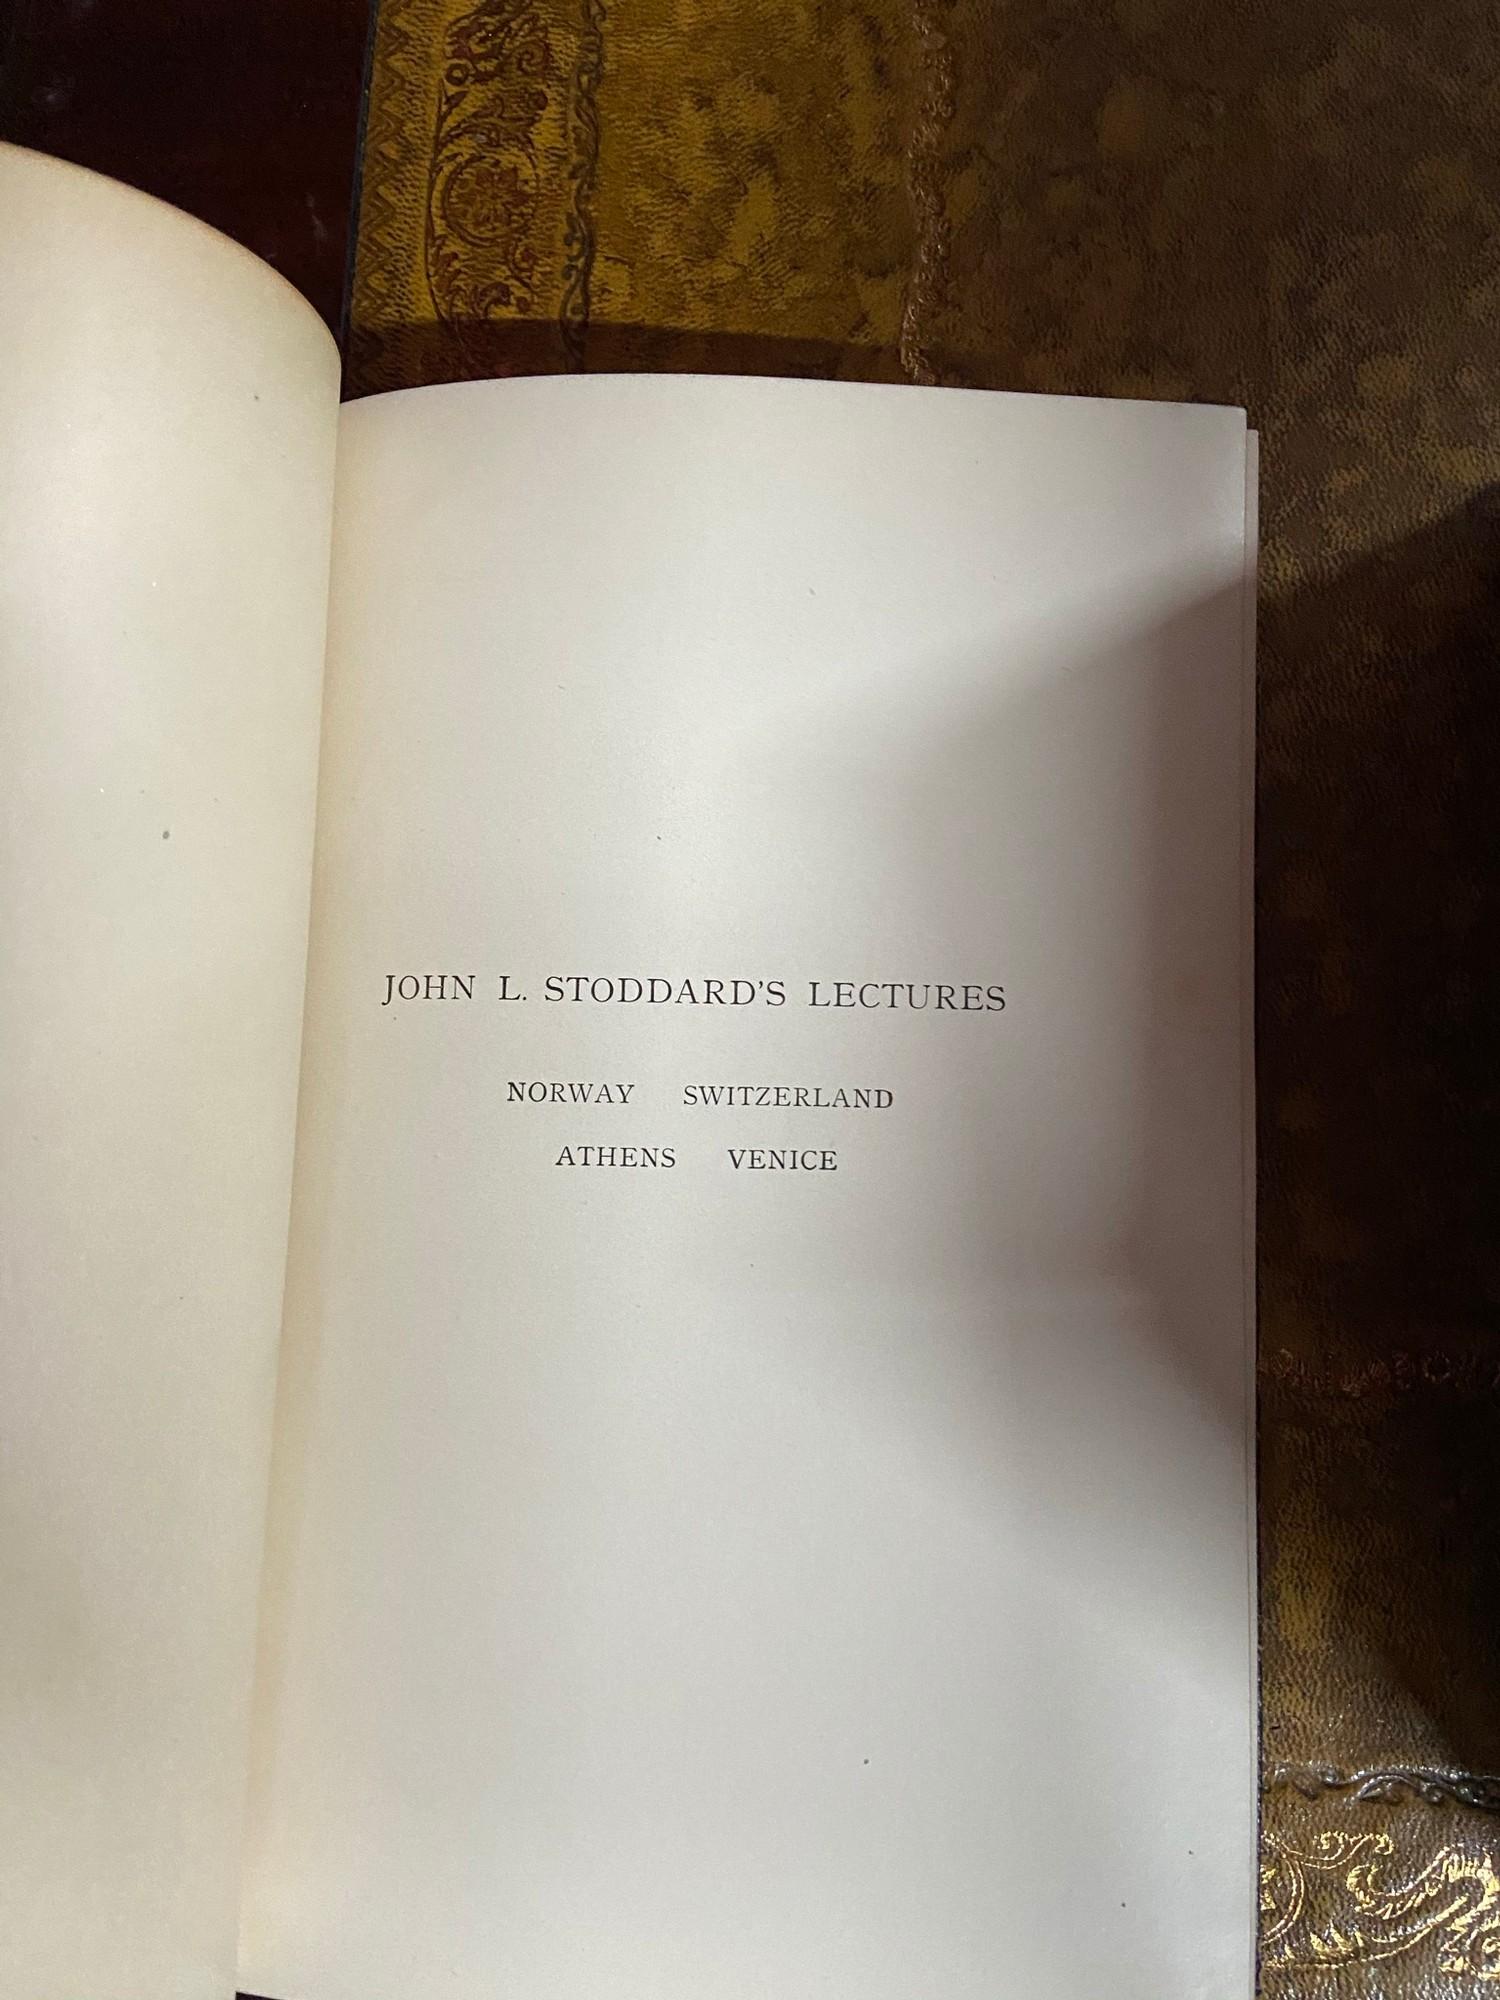 A Collections of Stoddard's Lectures books - Image 5 of 6